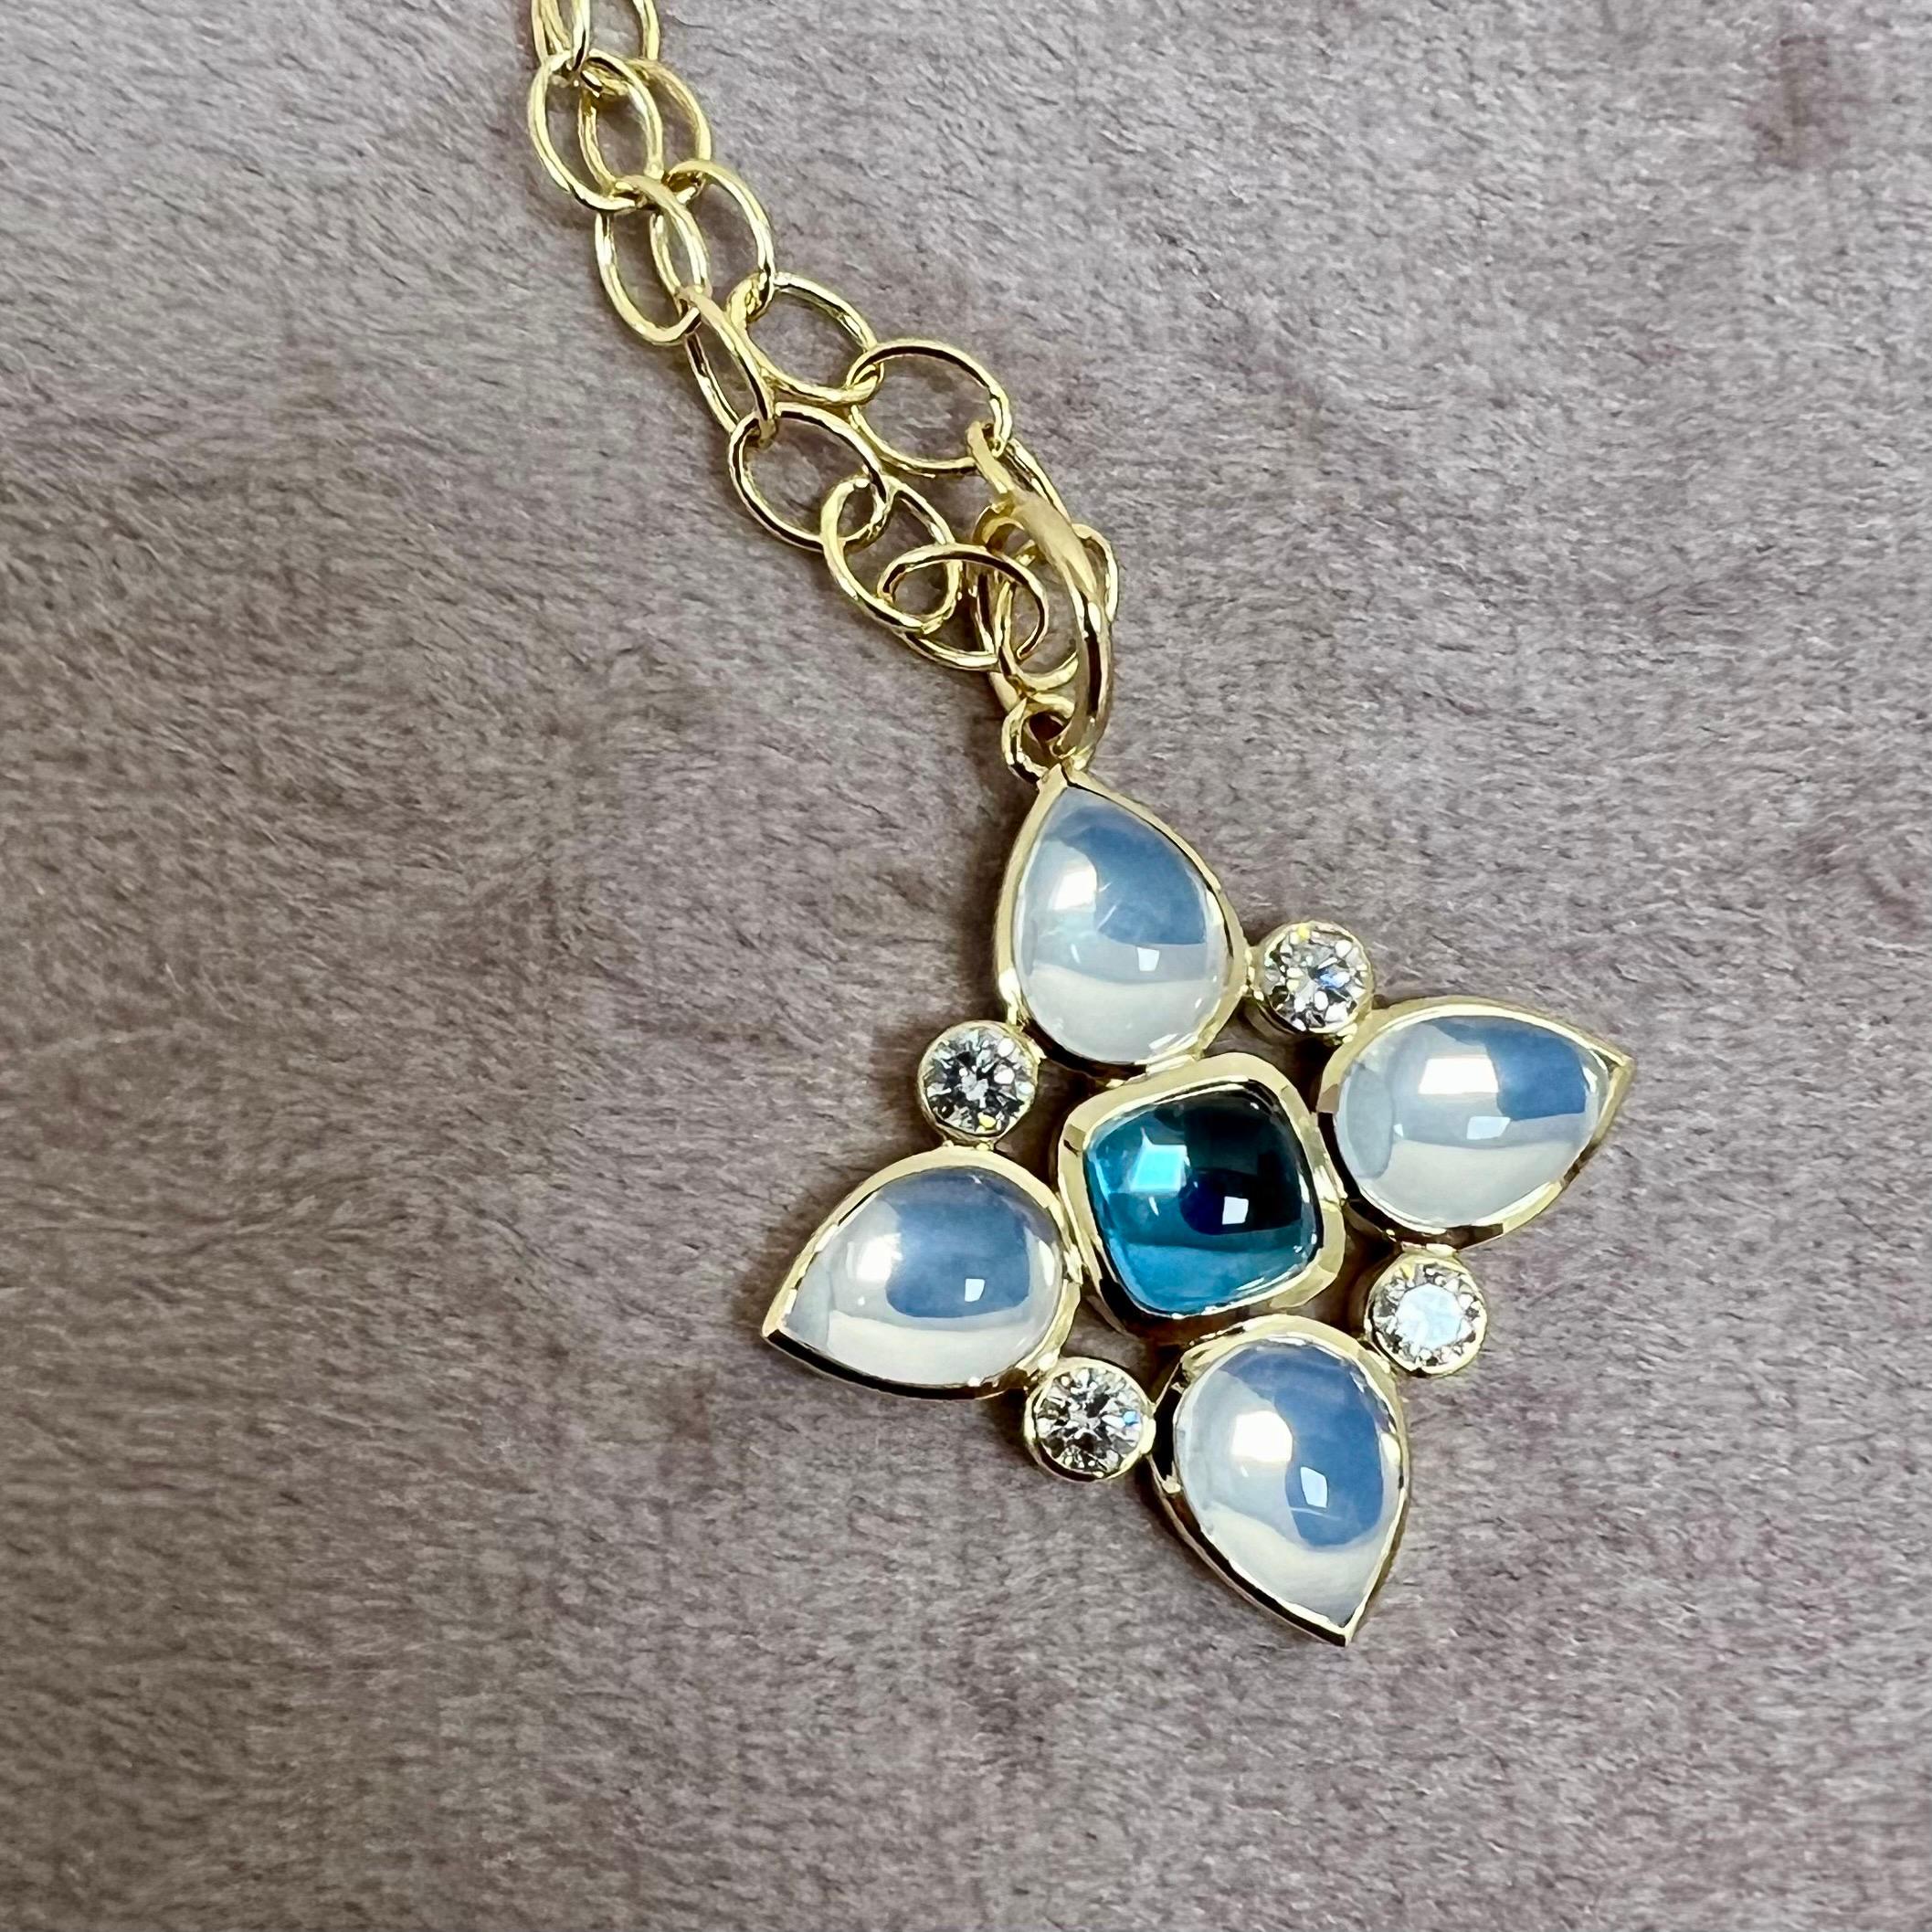 Created in 18 karat yellow gold
London Blue Topaz 1.50 carats approx.
Moon Quartz 4.50 carats approx.
Diamonds 0.45 carat approx.
Chain sold separately

Enrobing 18 karat yellow gold, a labradorite of 1.50 carats, moon quartz of 4.50 carats, and